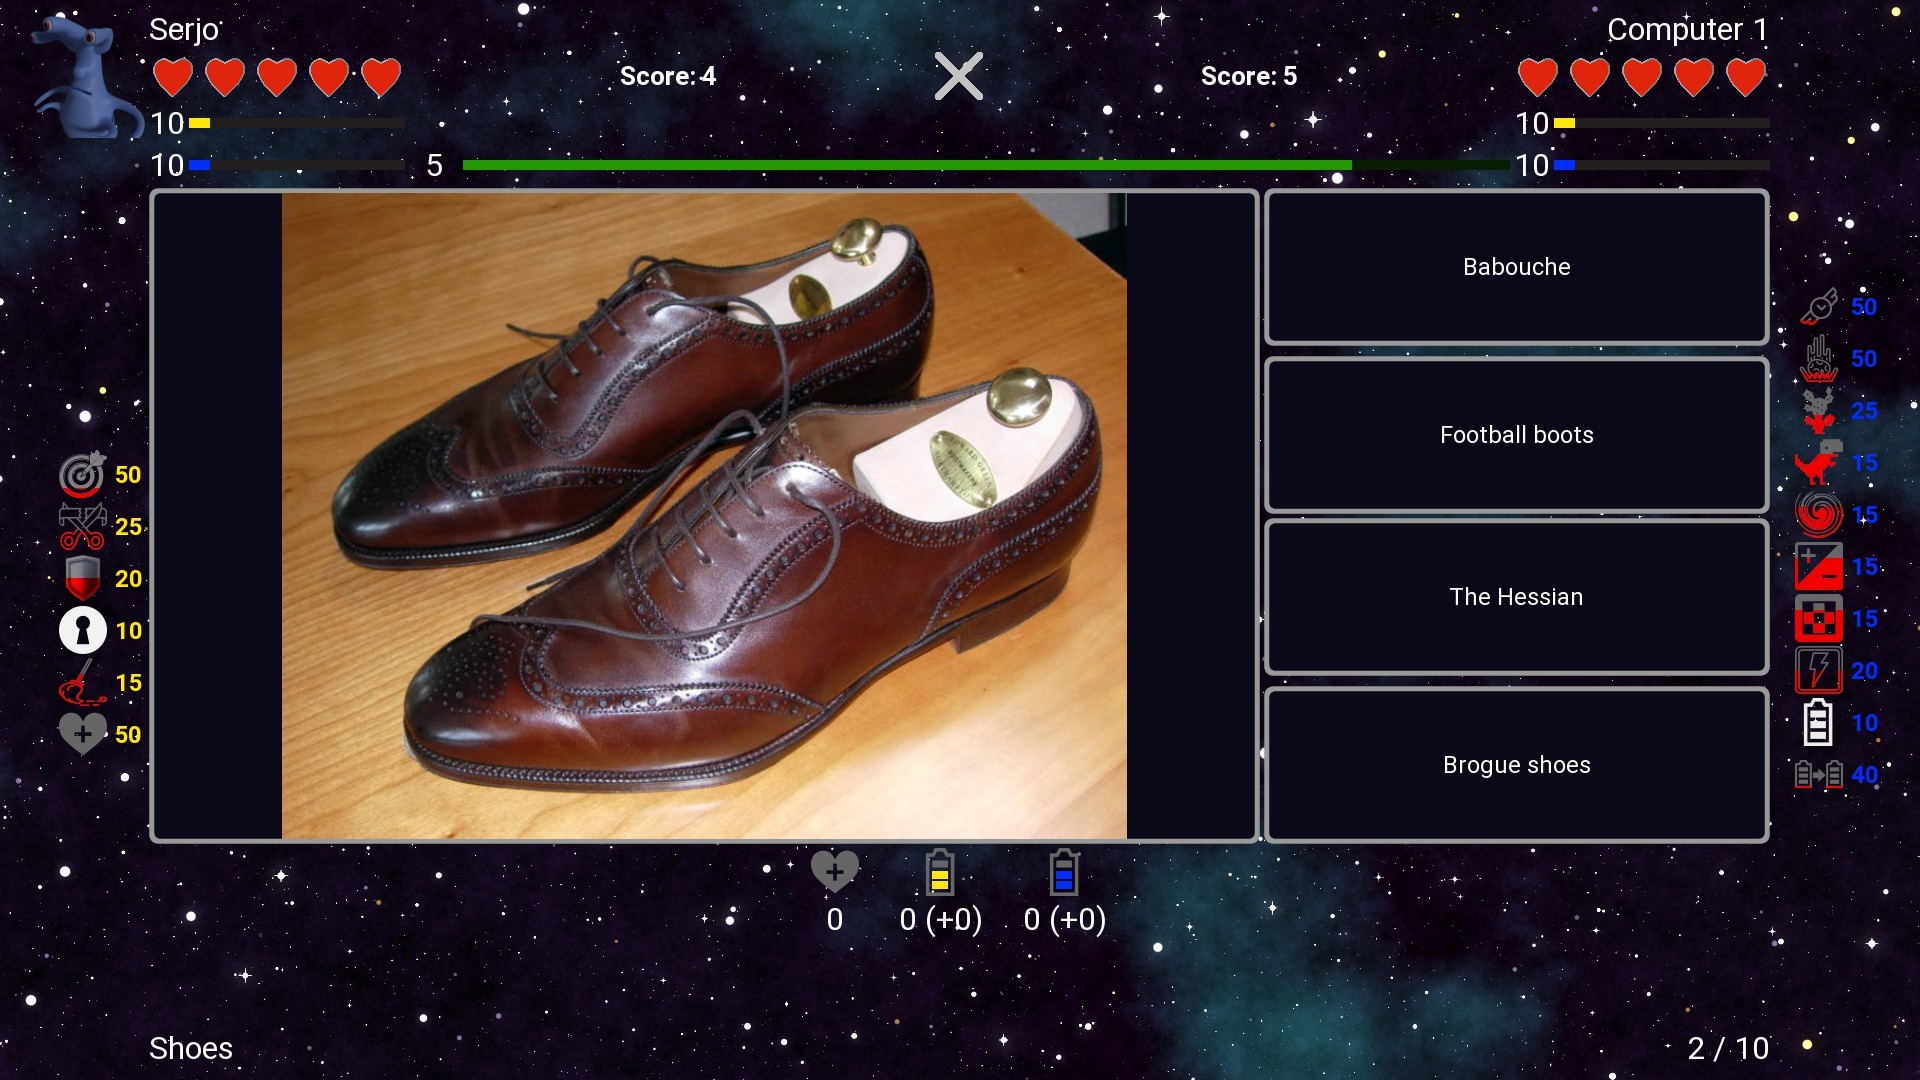 I've Seen Everything - Shoes Featured Screenshot #1